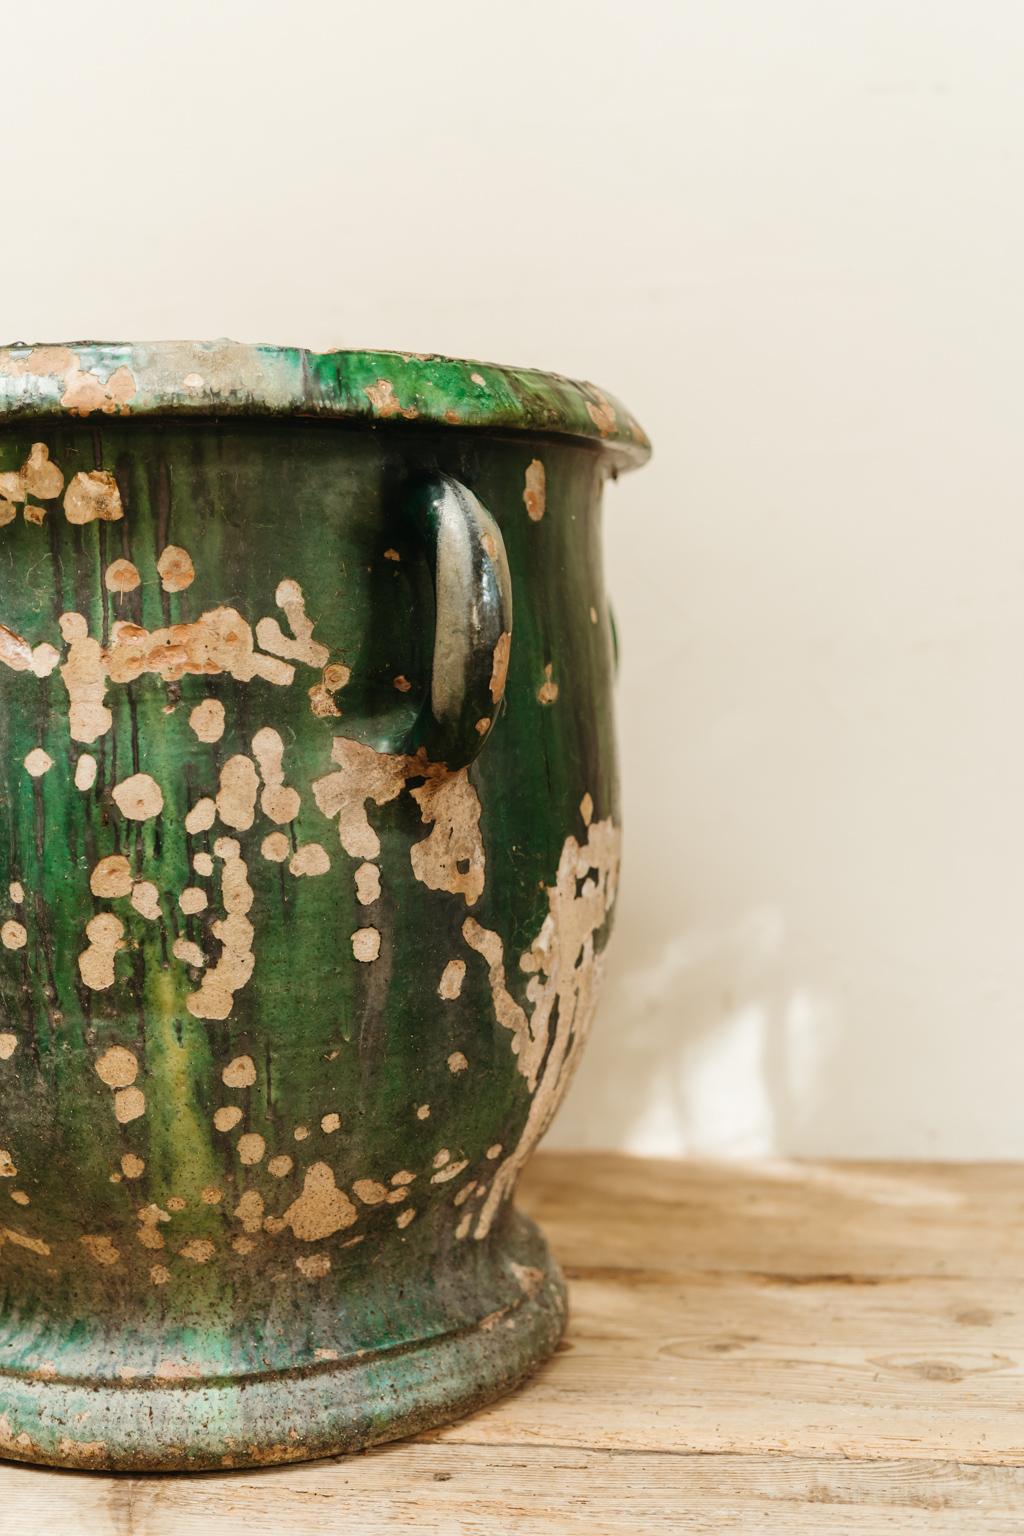 Sublime patina on this xl green glazed terra cotta planter / jardinière from Castelnaudary, this planter can be used indoors our outdoors, was created for a castle garden in the South of France.